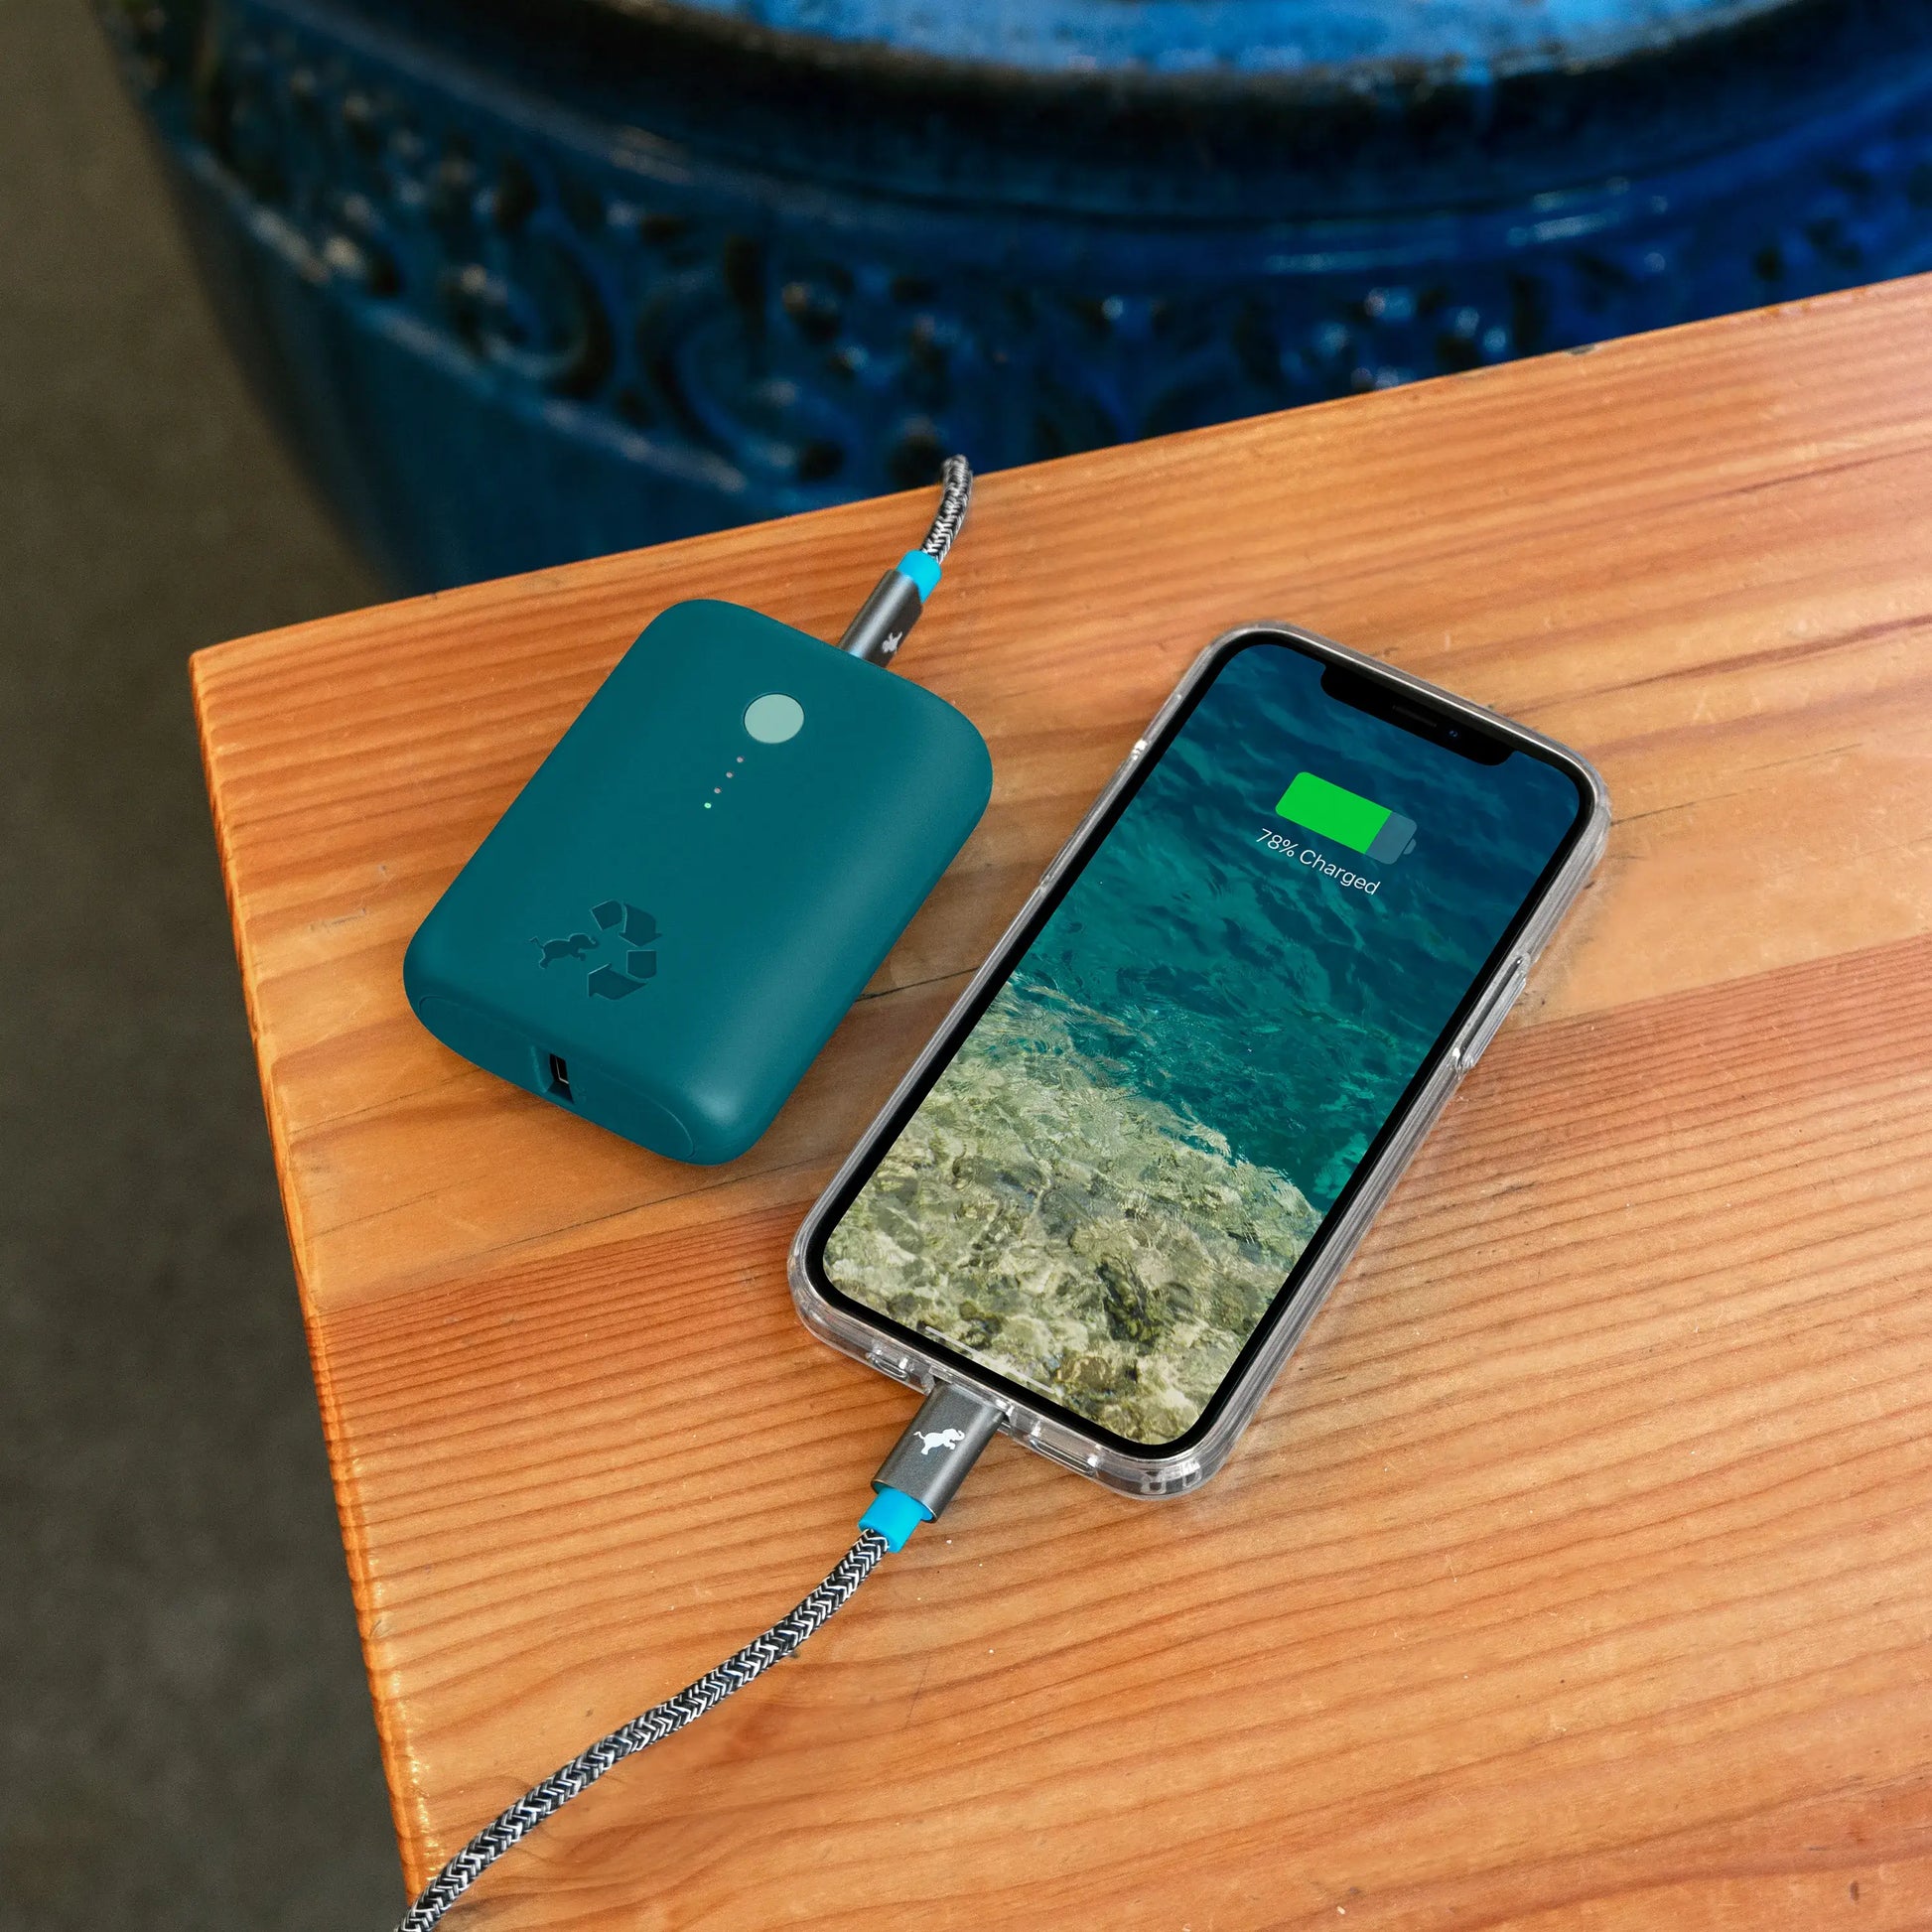 Turquoise portable charger with green button connected to cell phone on a table.